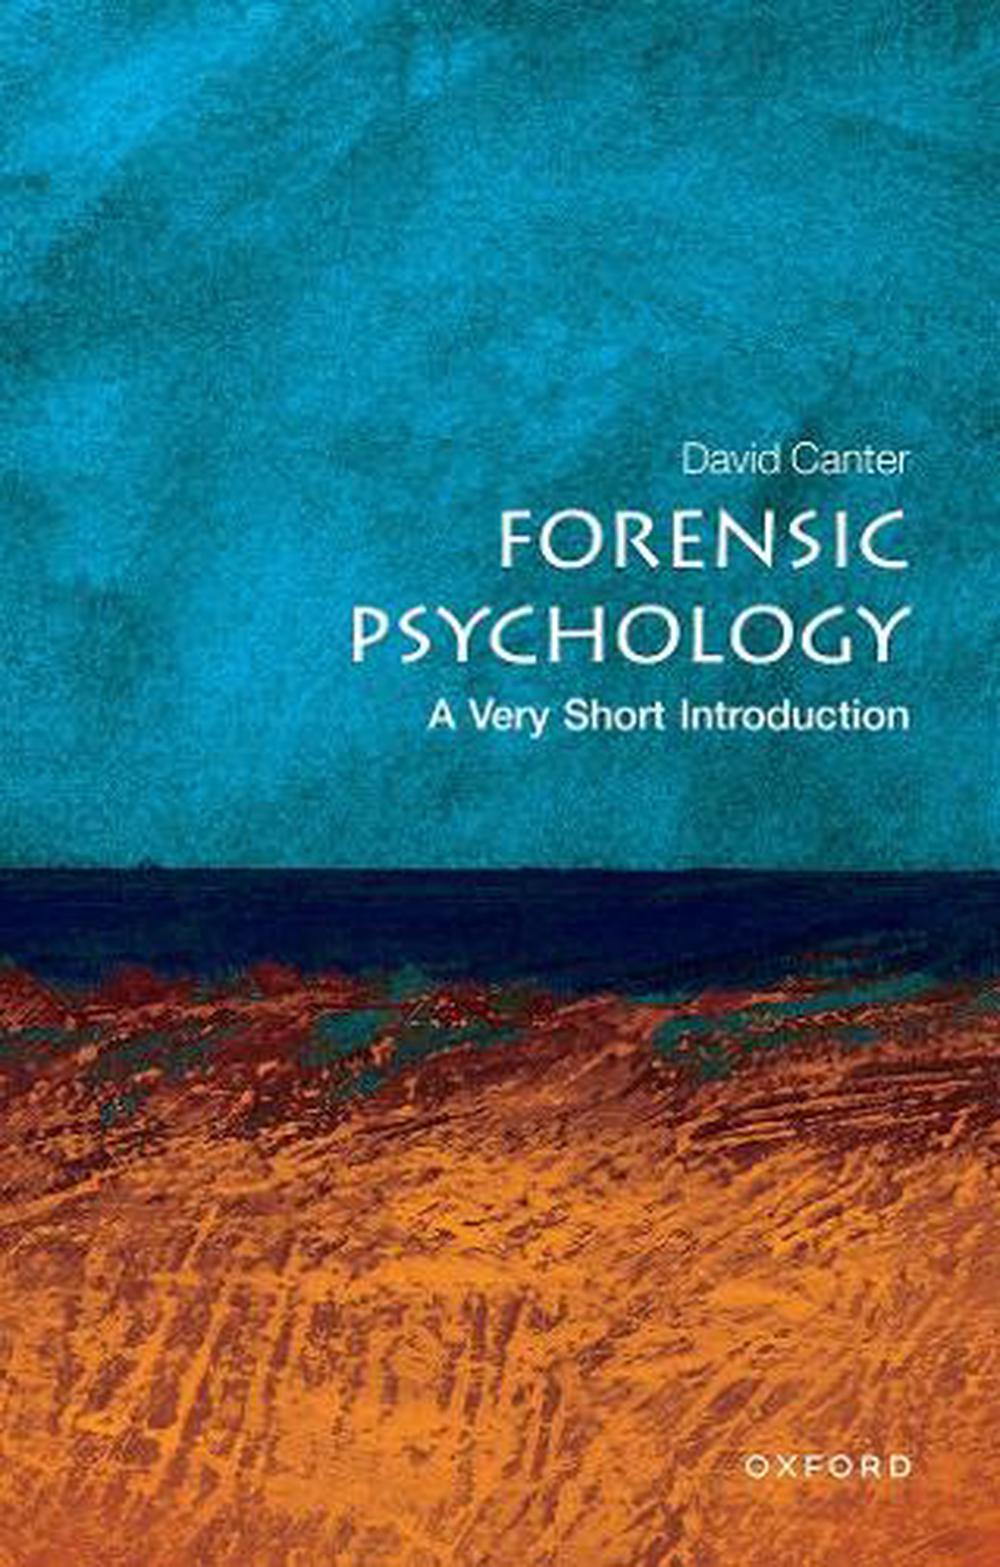 case studies in forensic psychology